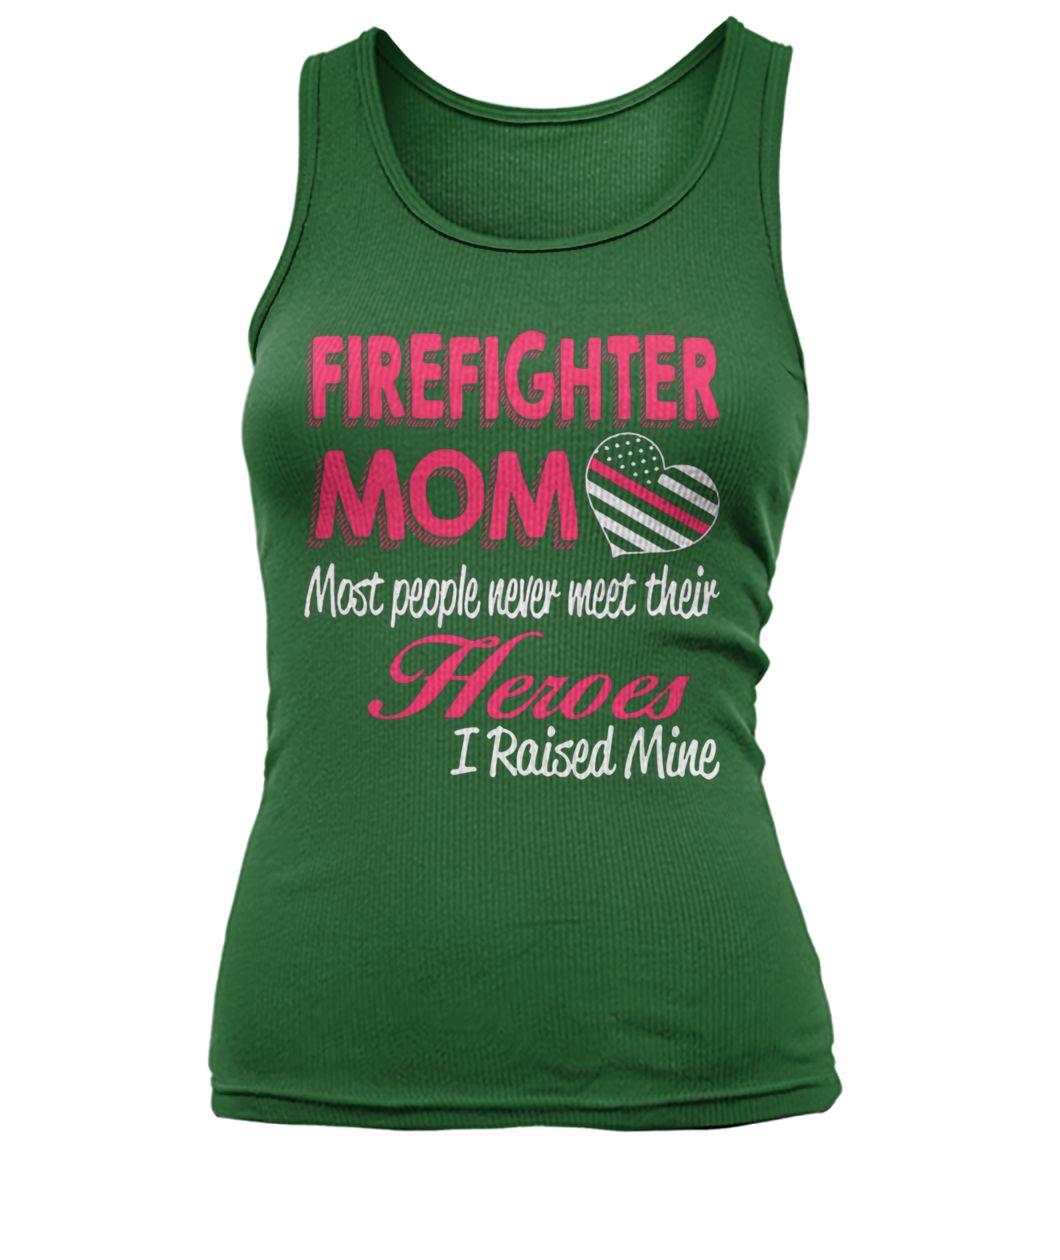 Firefighter mom most of people never meet their heroes I raised mine women's tank top